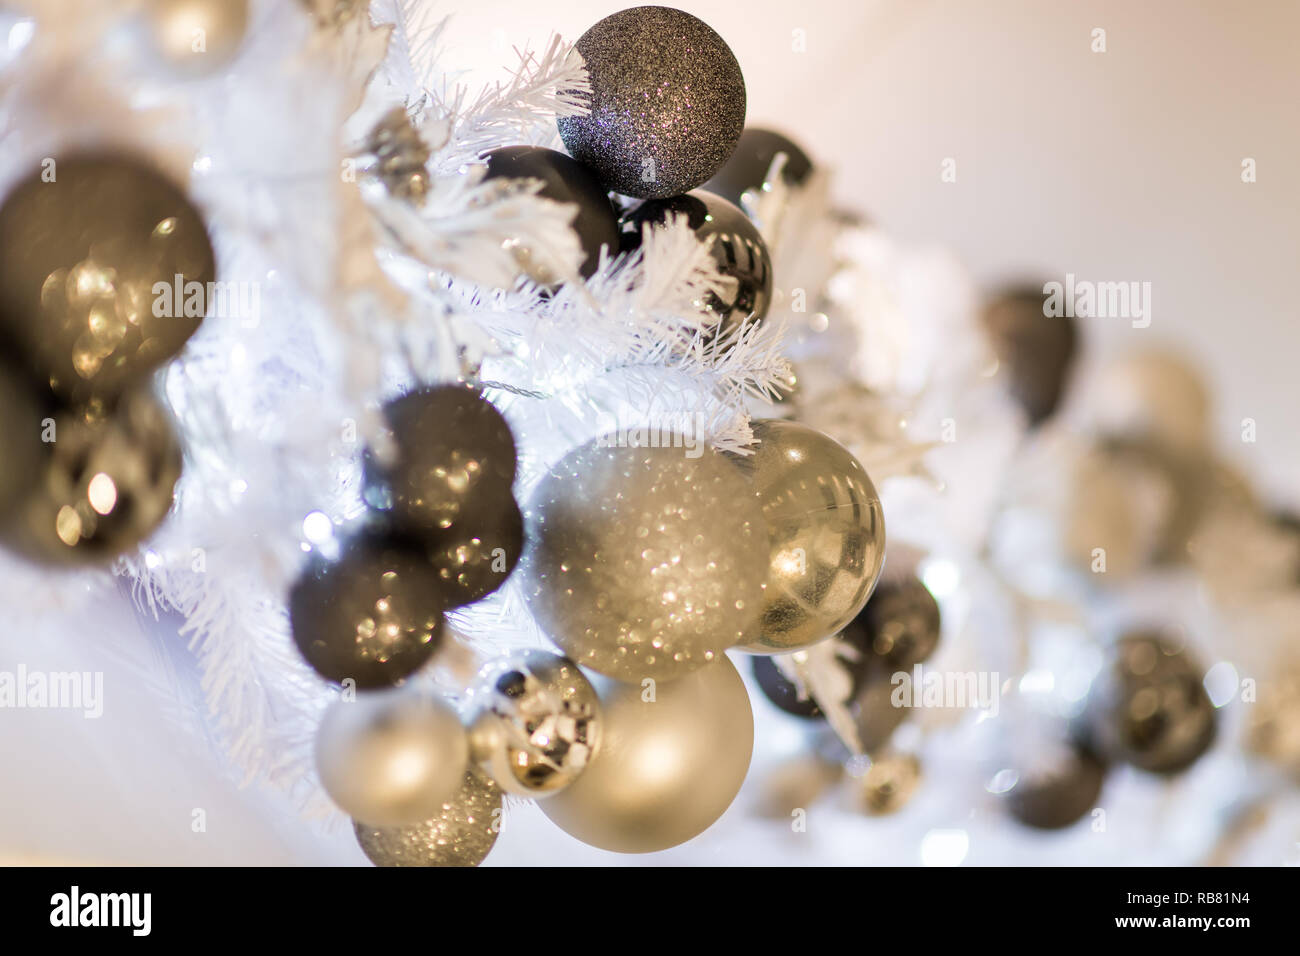 Chrismas decorations with tinsel and baubles Stock Photo